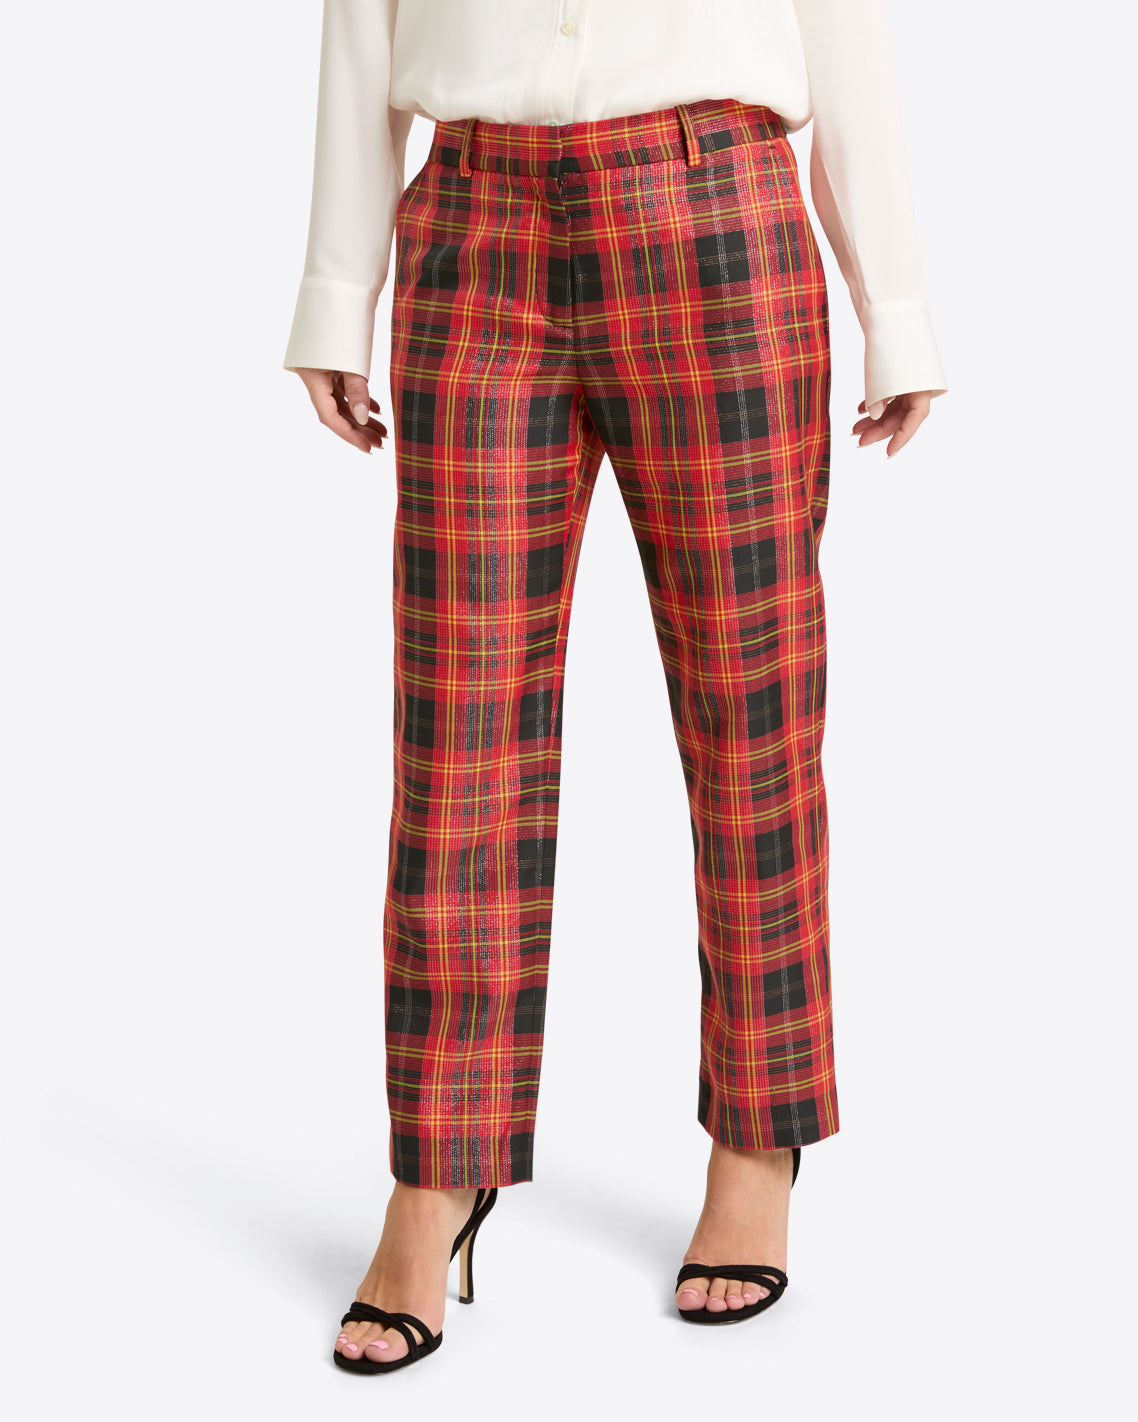 Draper Pant in Brick Red in 2023  Pull on pants, Hampden clothing